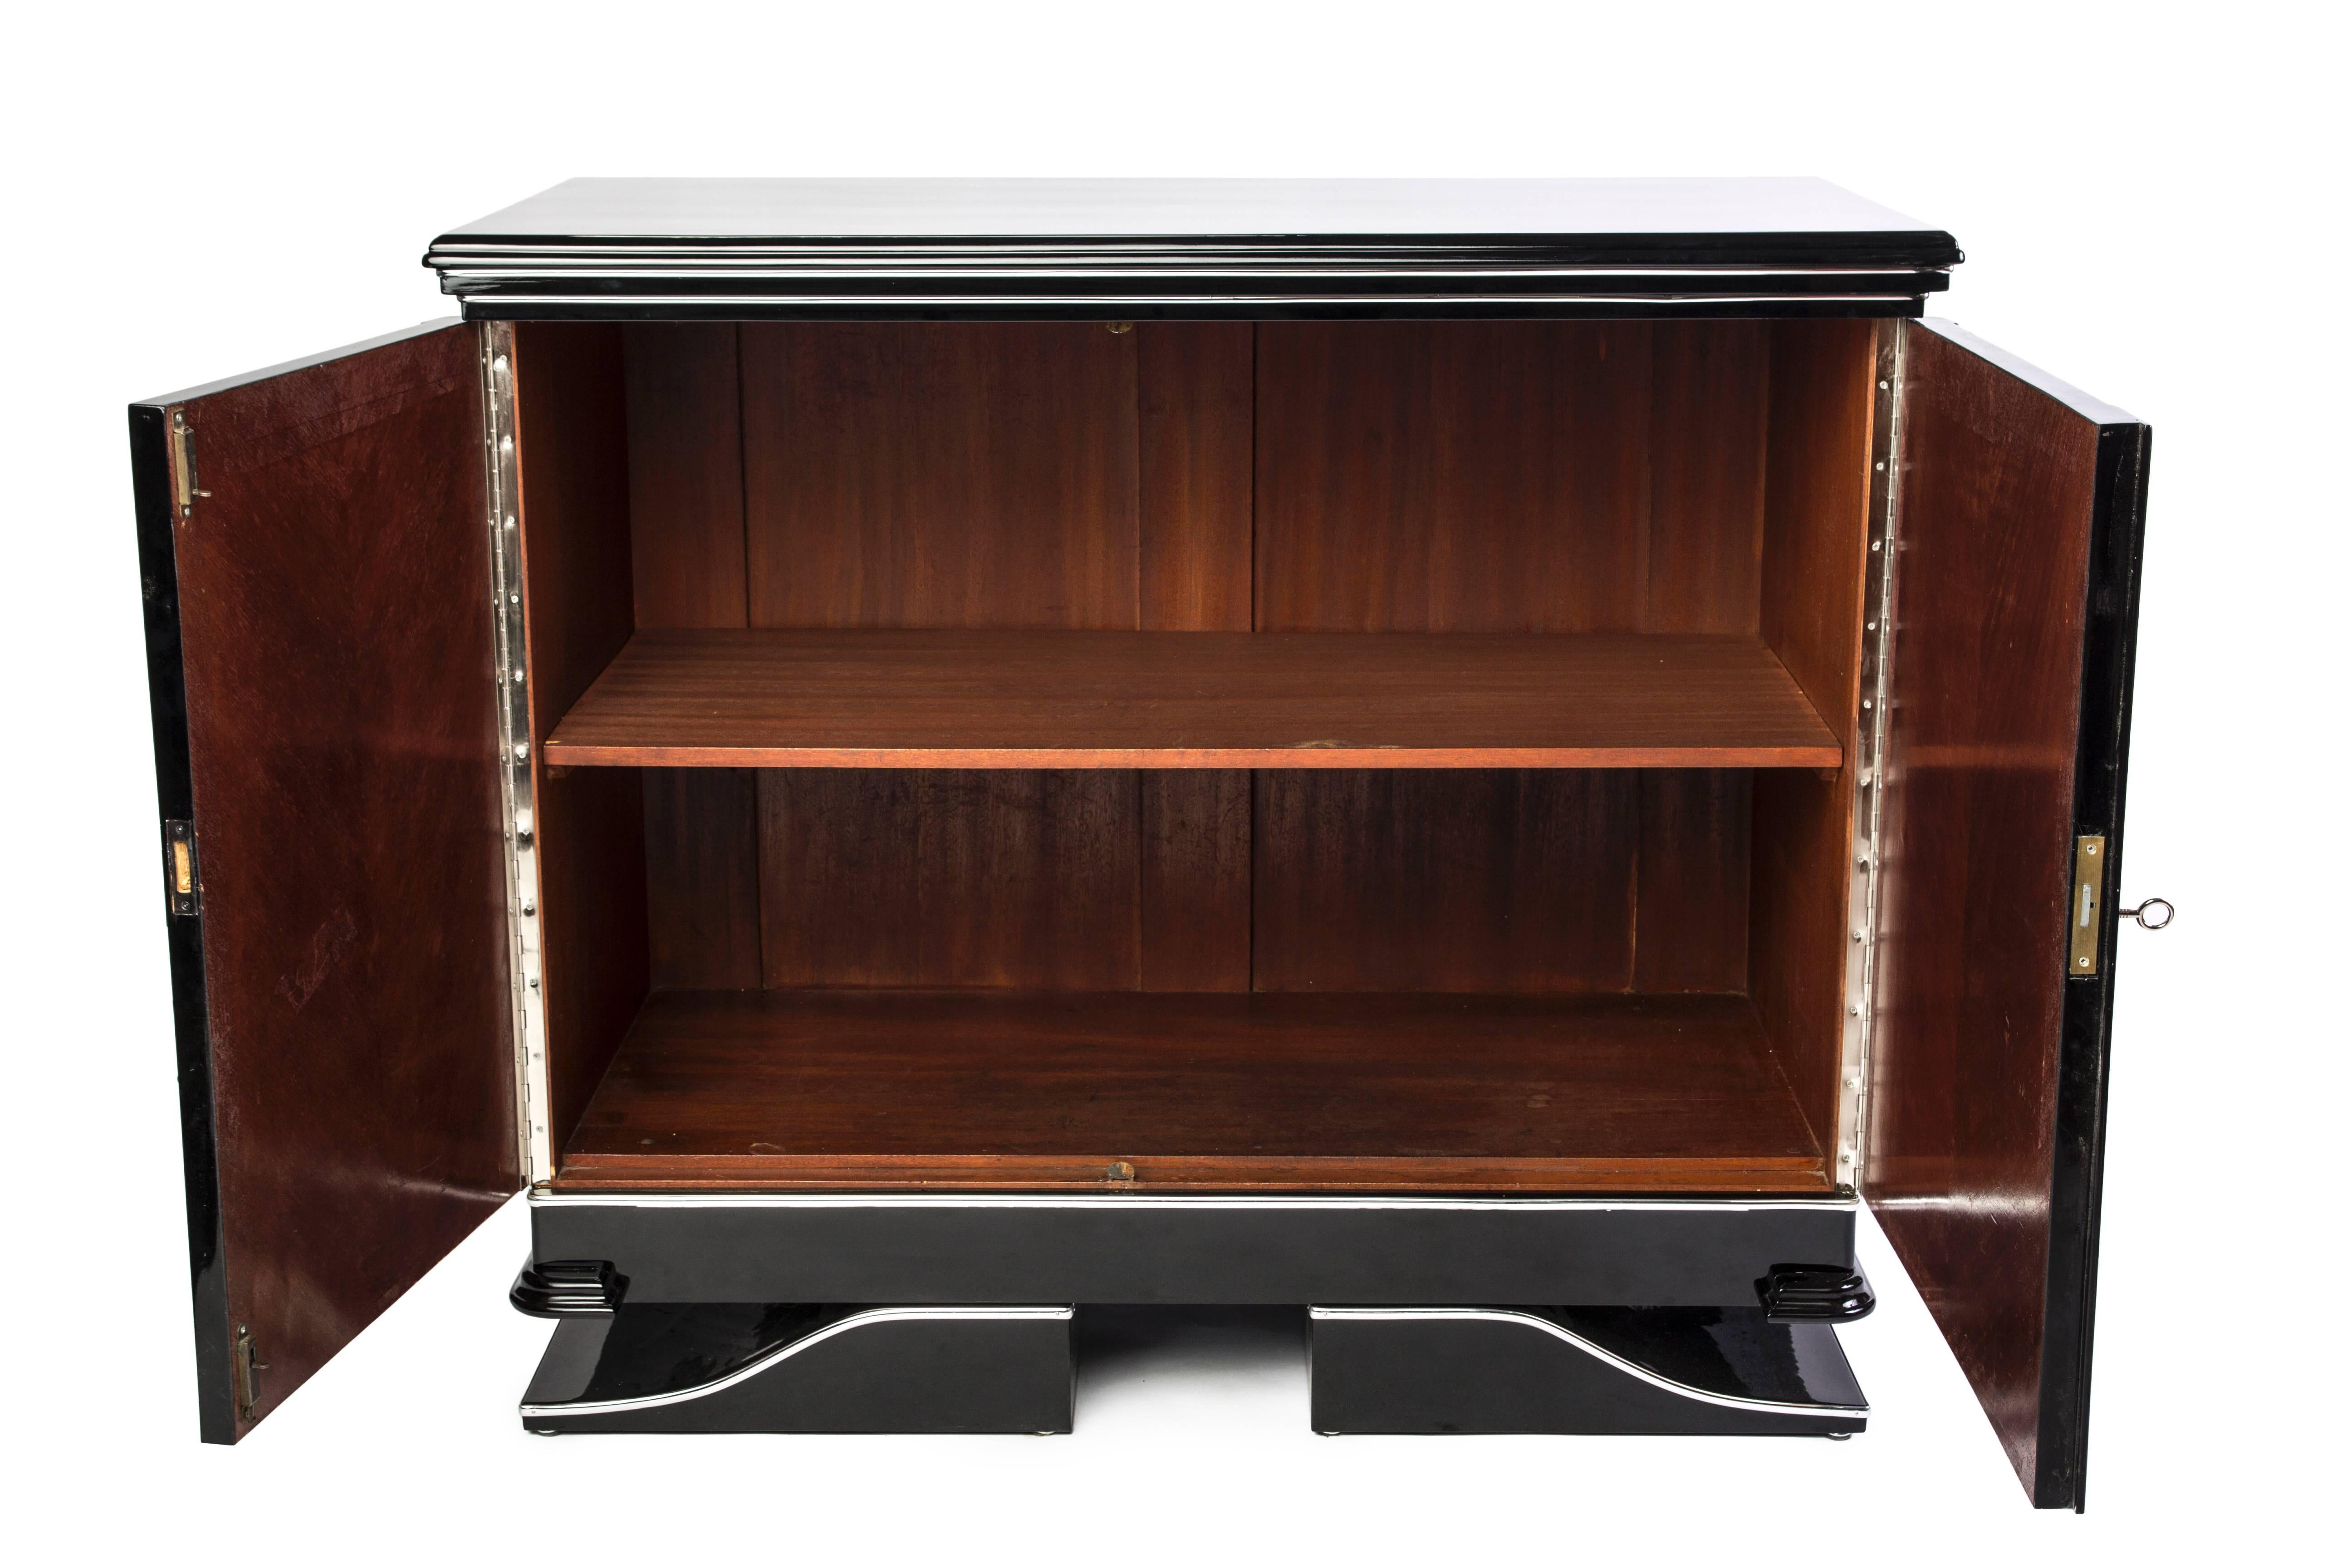 This elegant Art Deco commode features chrome lines applications and a cherrywood interior with a black piano lacquer finish.